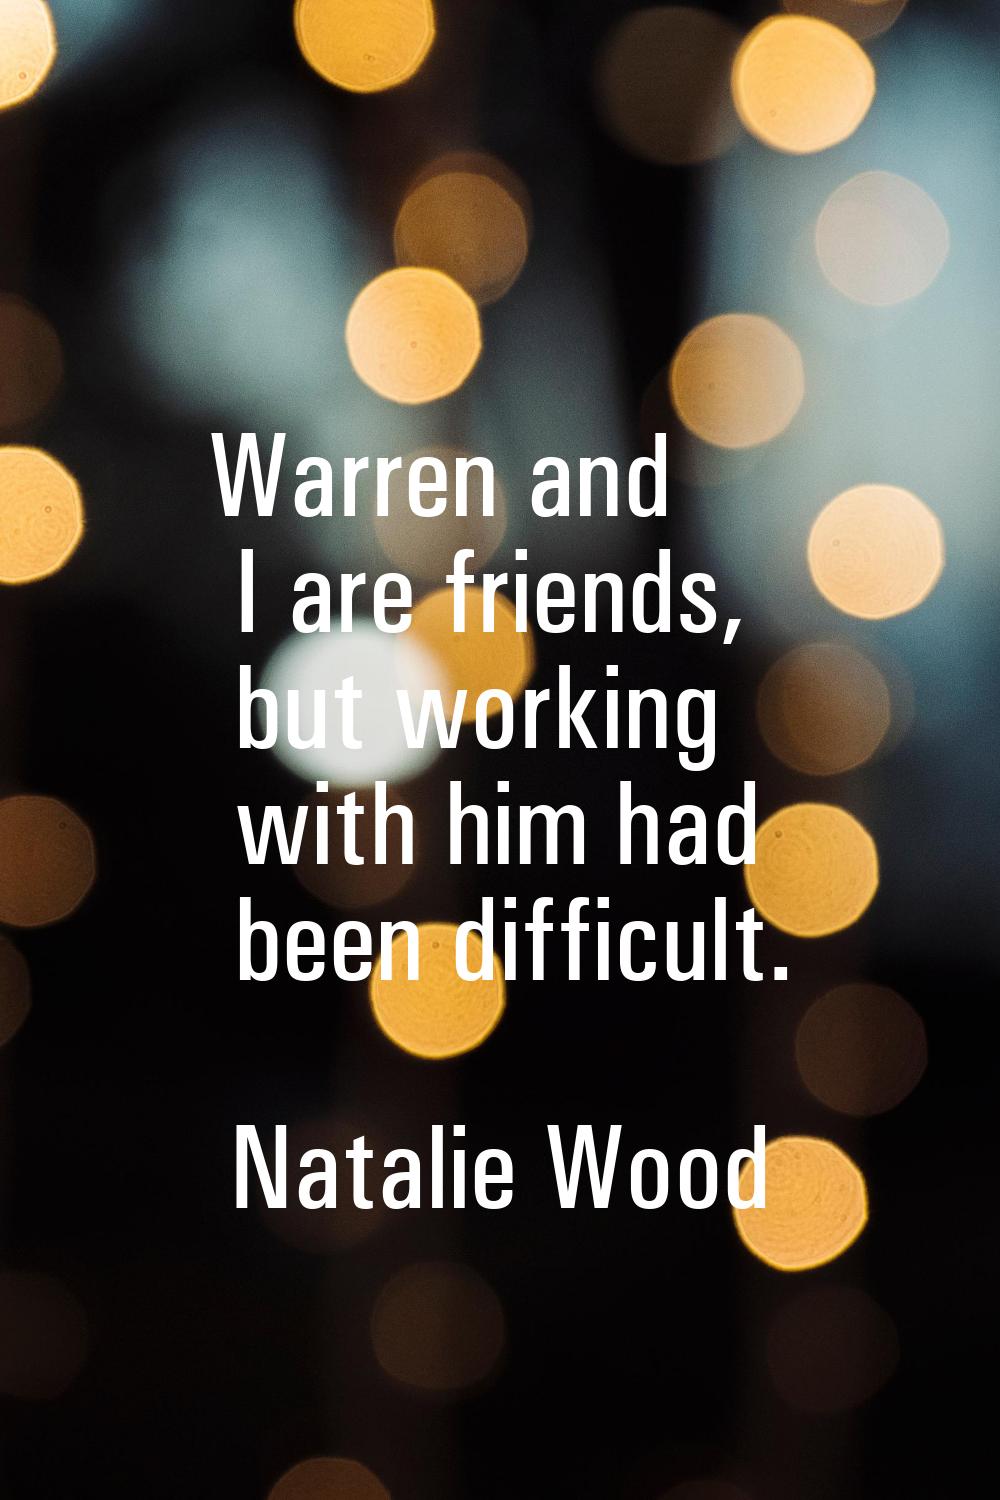 Warren and I are friends, but working with him had been difficult.